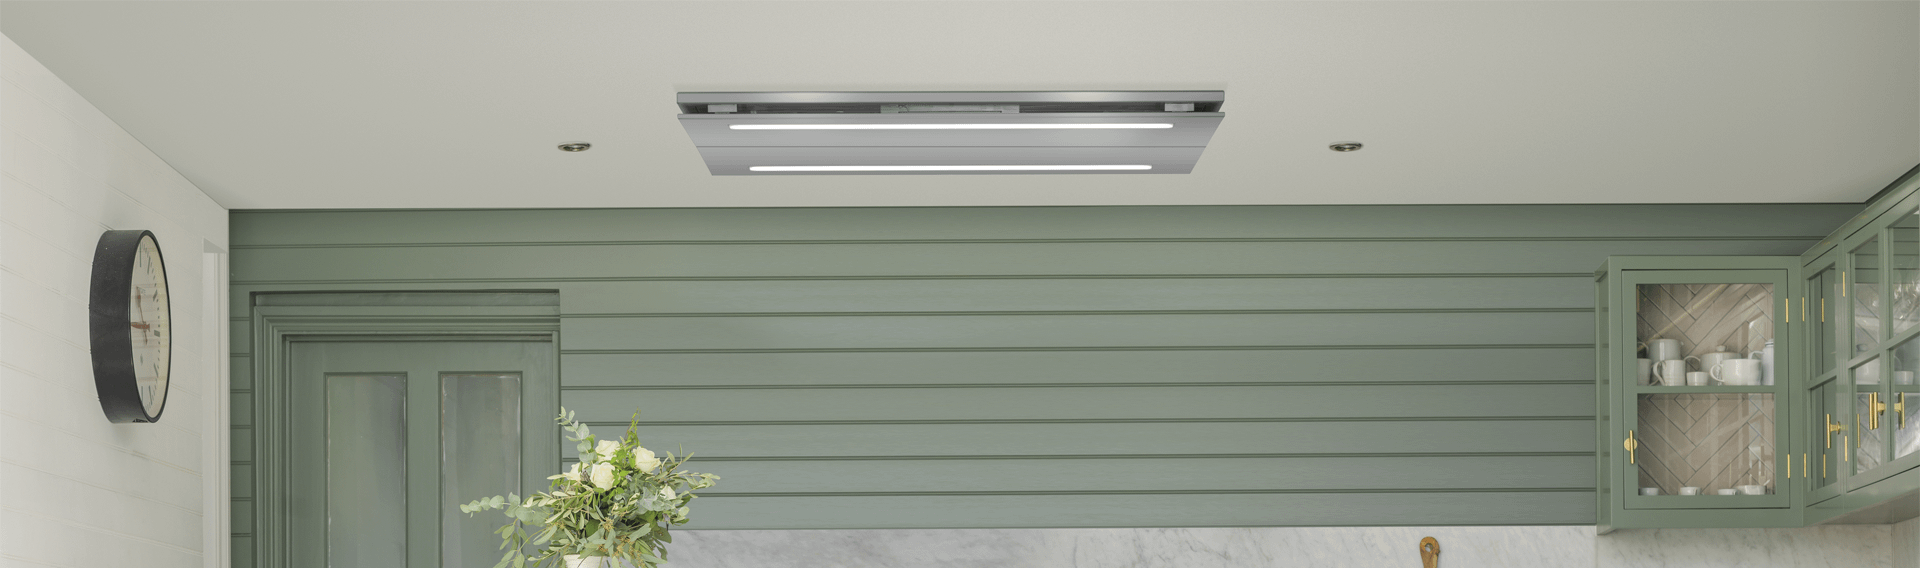 A Caple cieling hood with a green wall paper and clock on the left of the picture